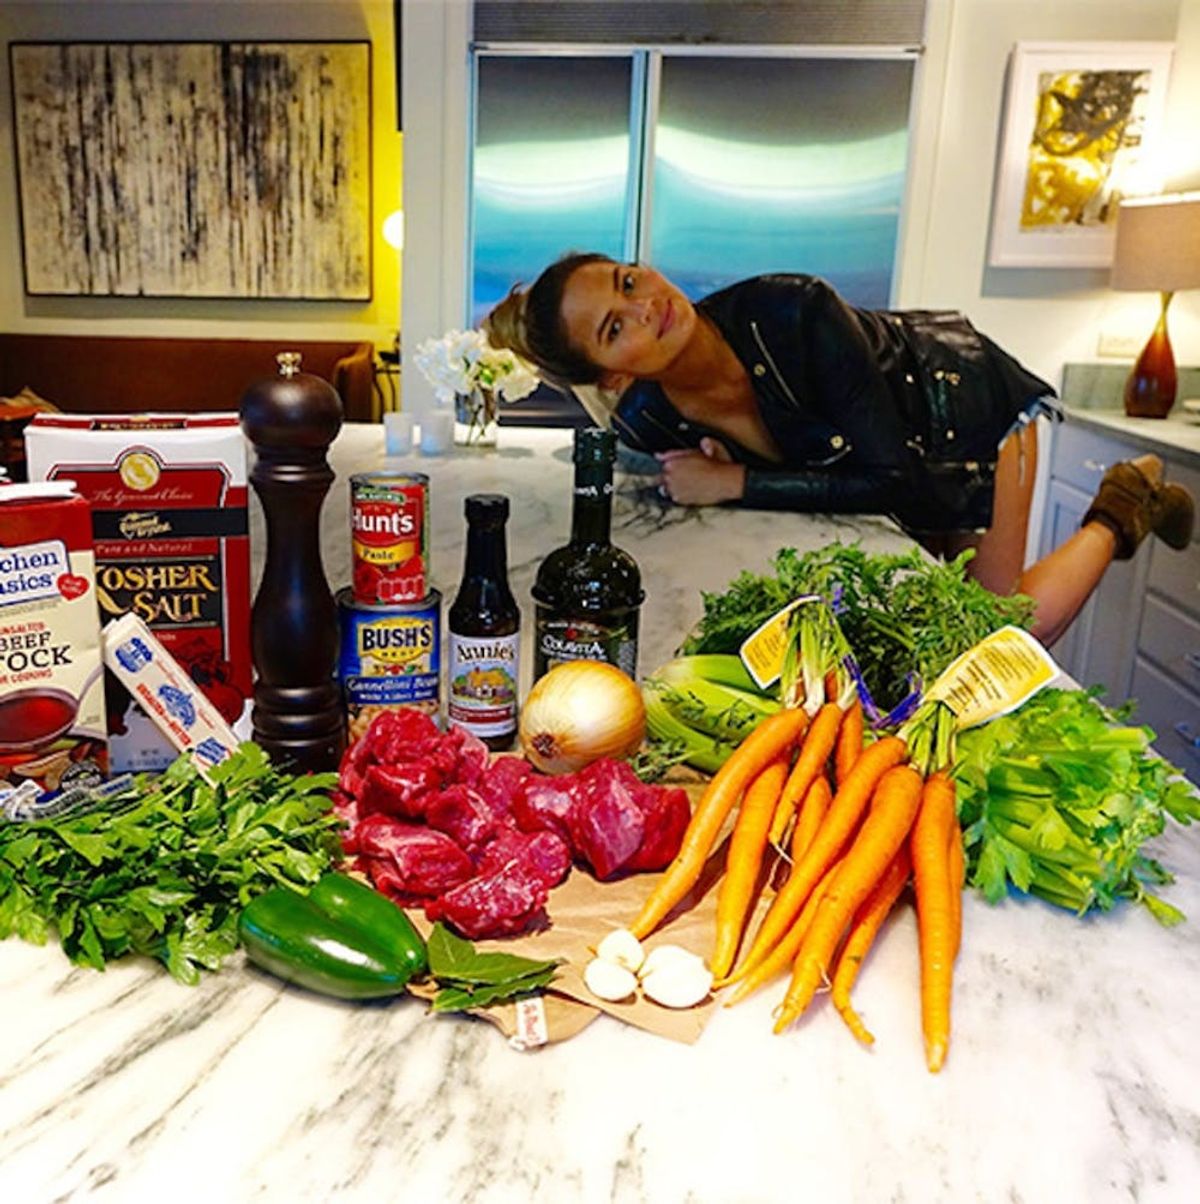 Moms-to-Be Will Want These 7 Crazy-Indulgent Recipes from Chrissy Teigen